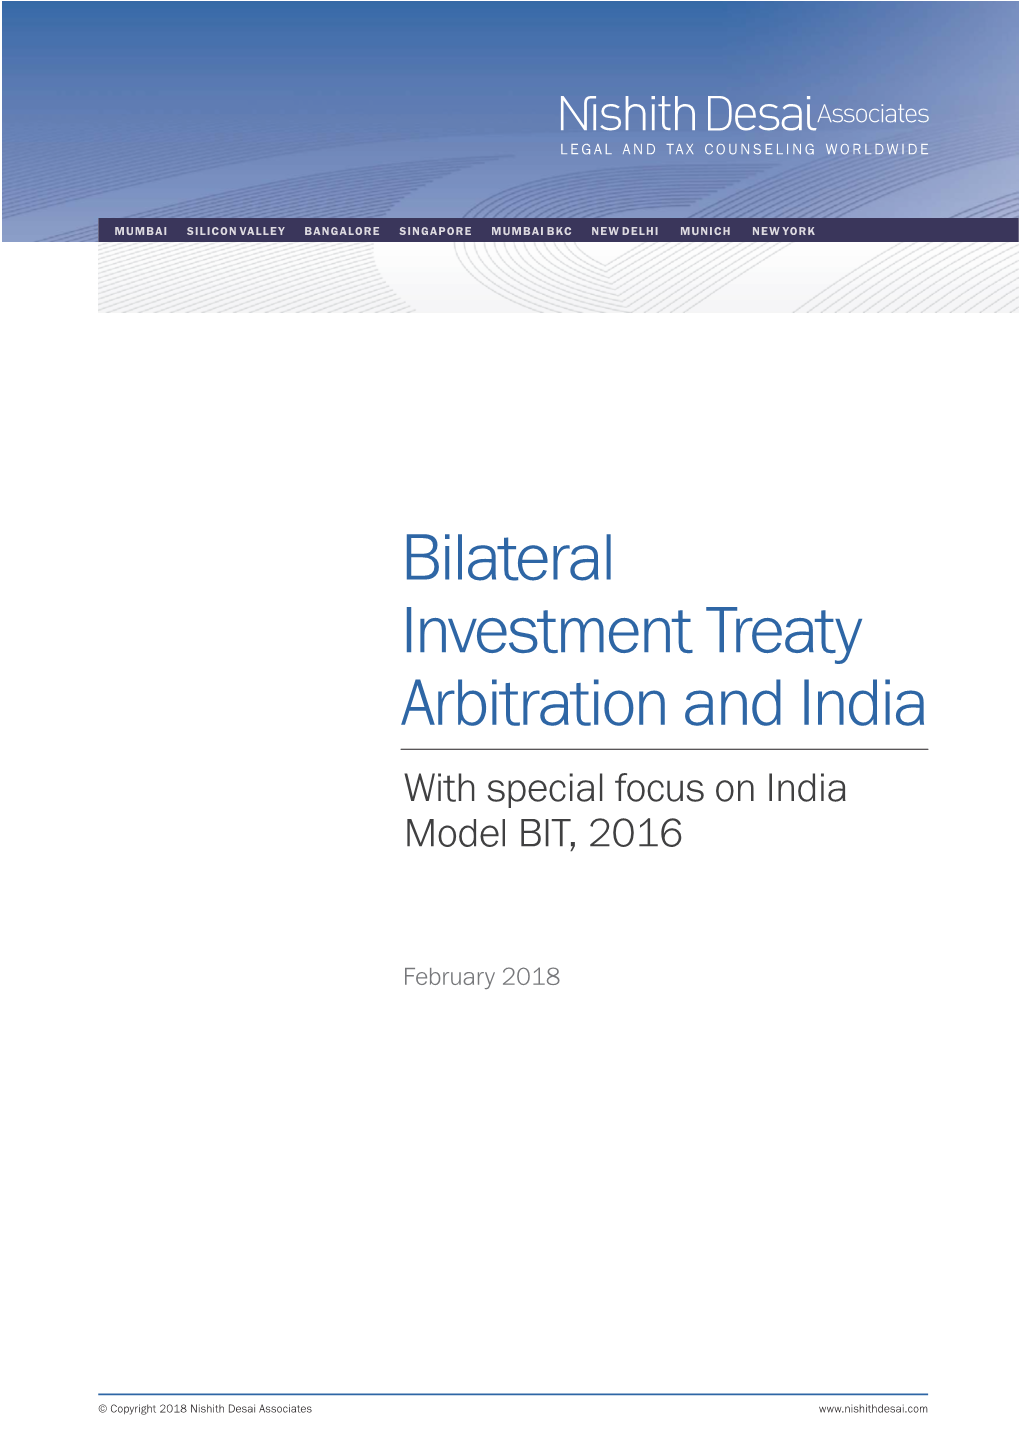 Bilateral Investment Treaty Arbitration and India with Special Focus on India Model BIT, 2016